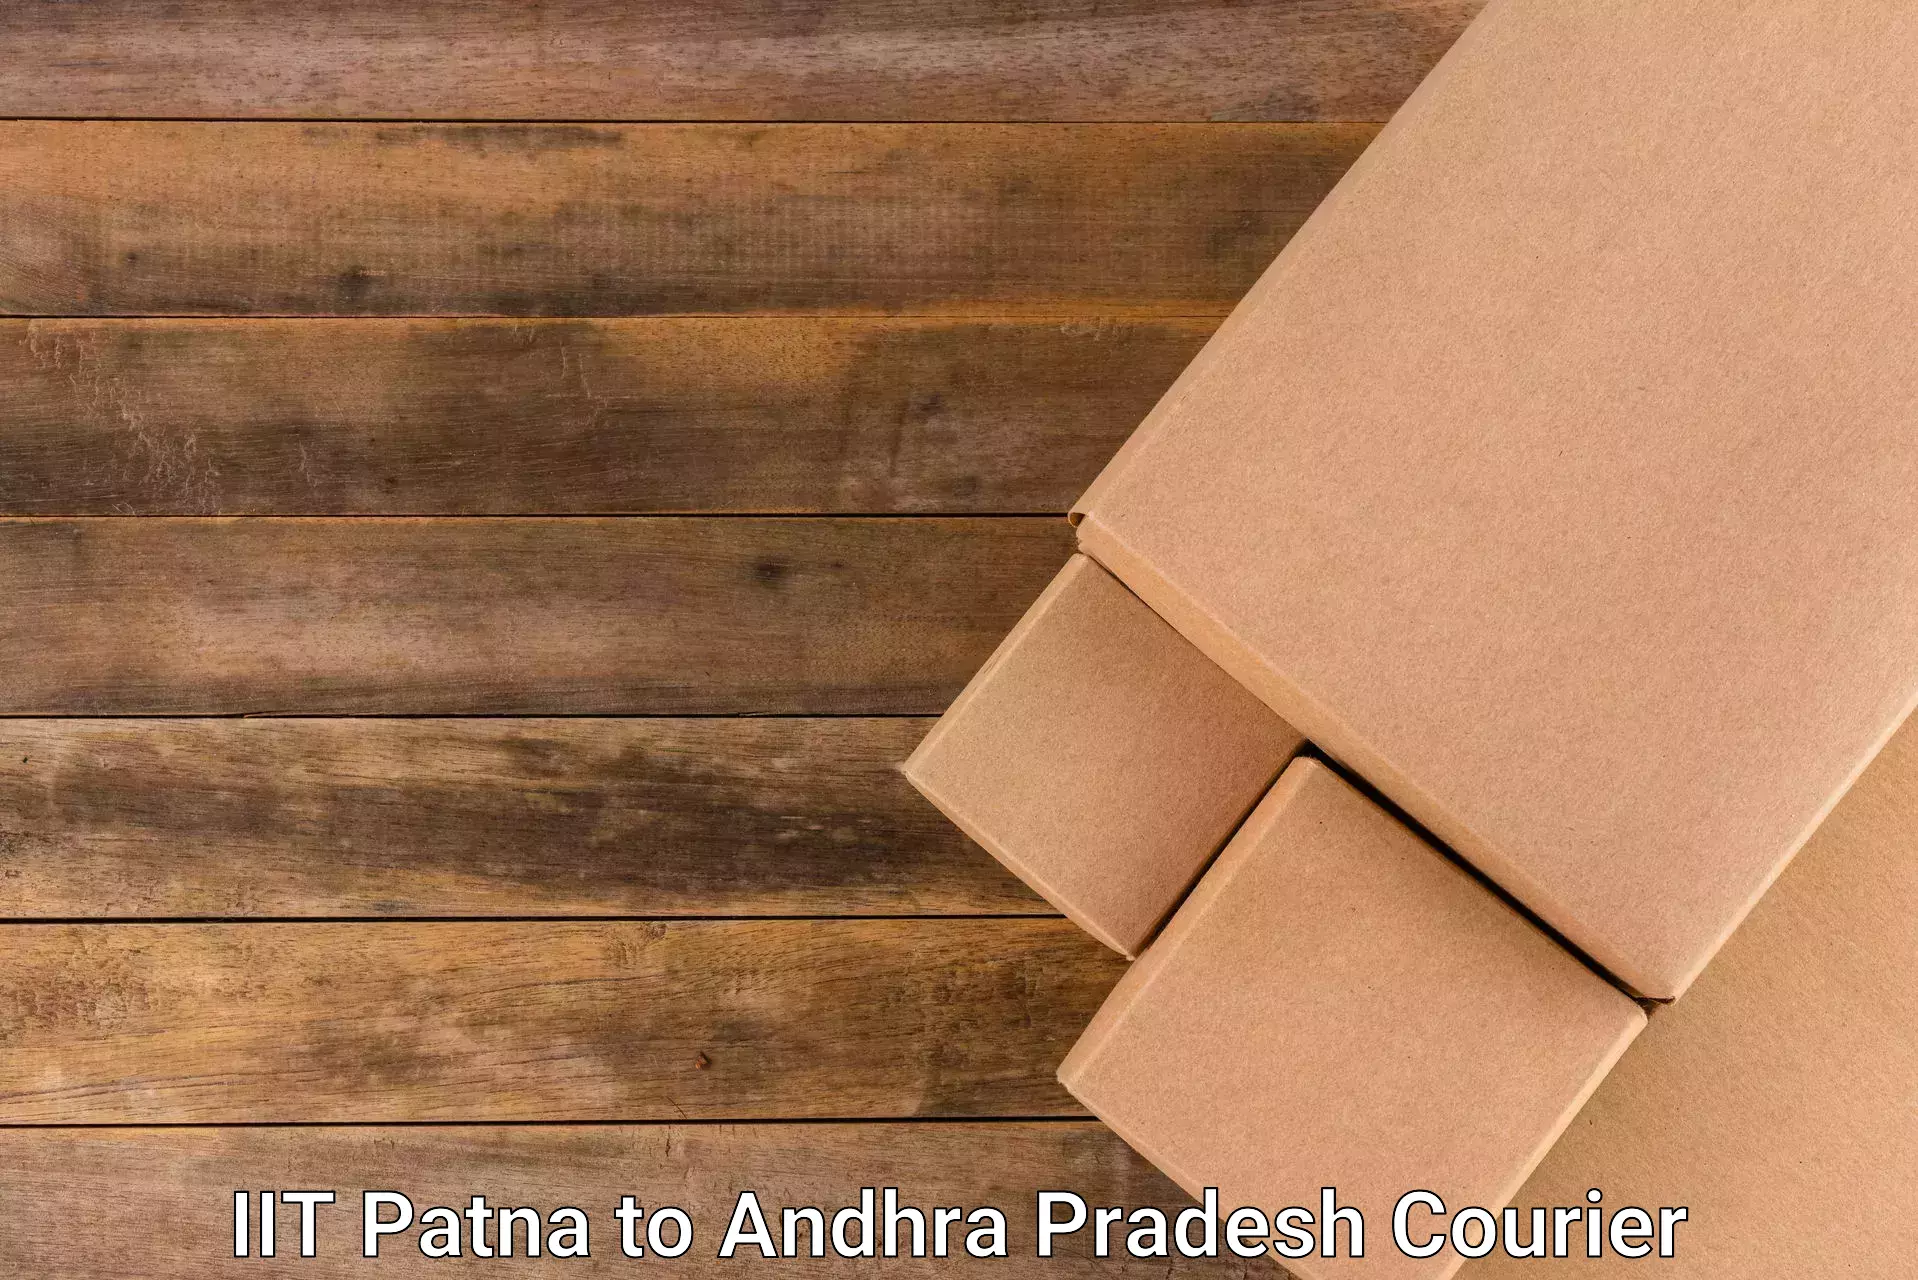 Custom courier packaging IIT Patna to Dhone